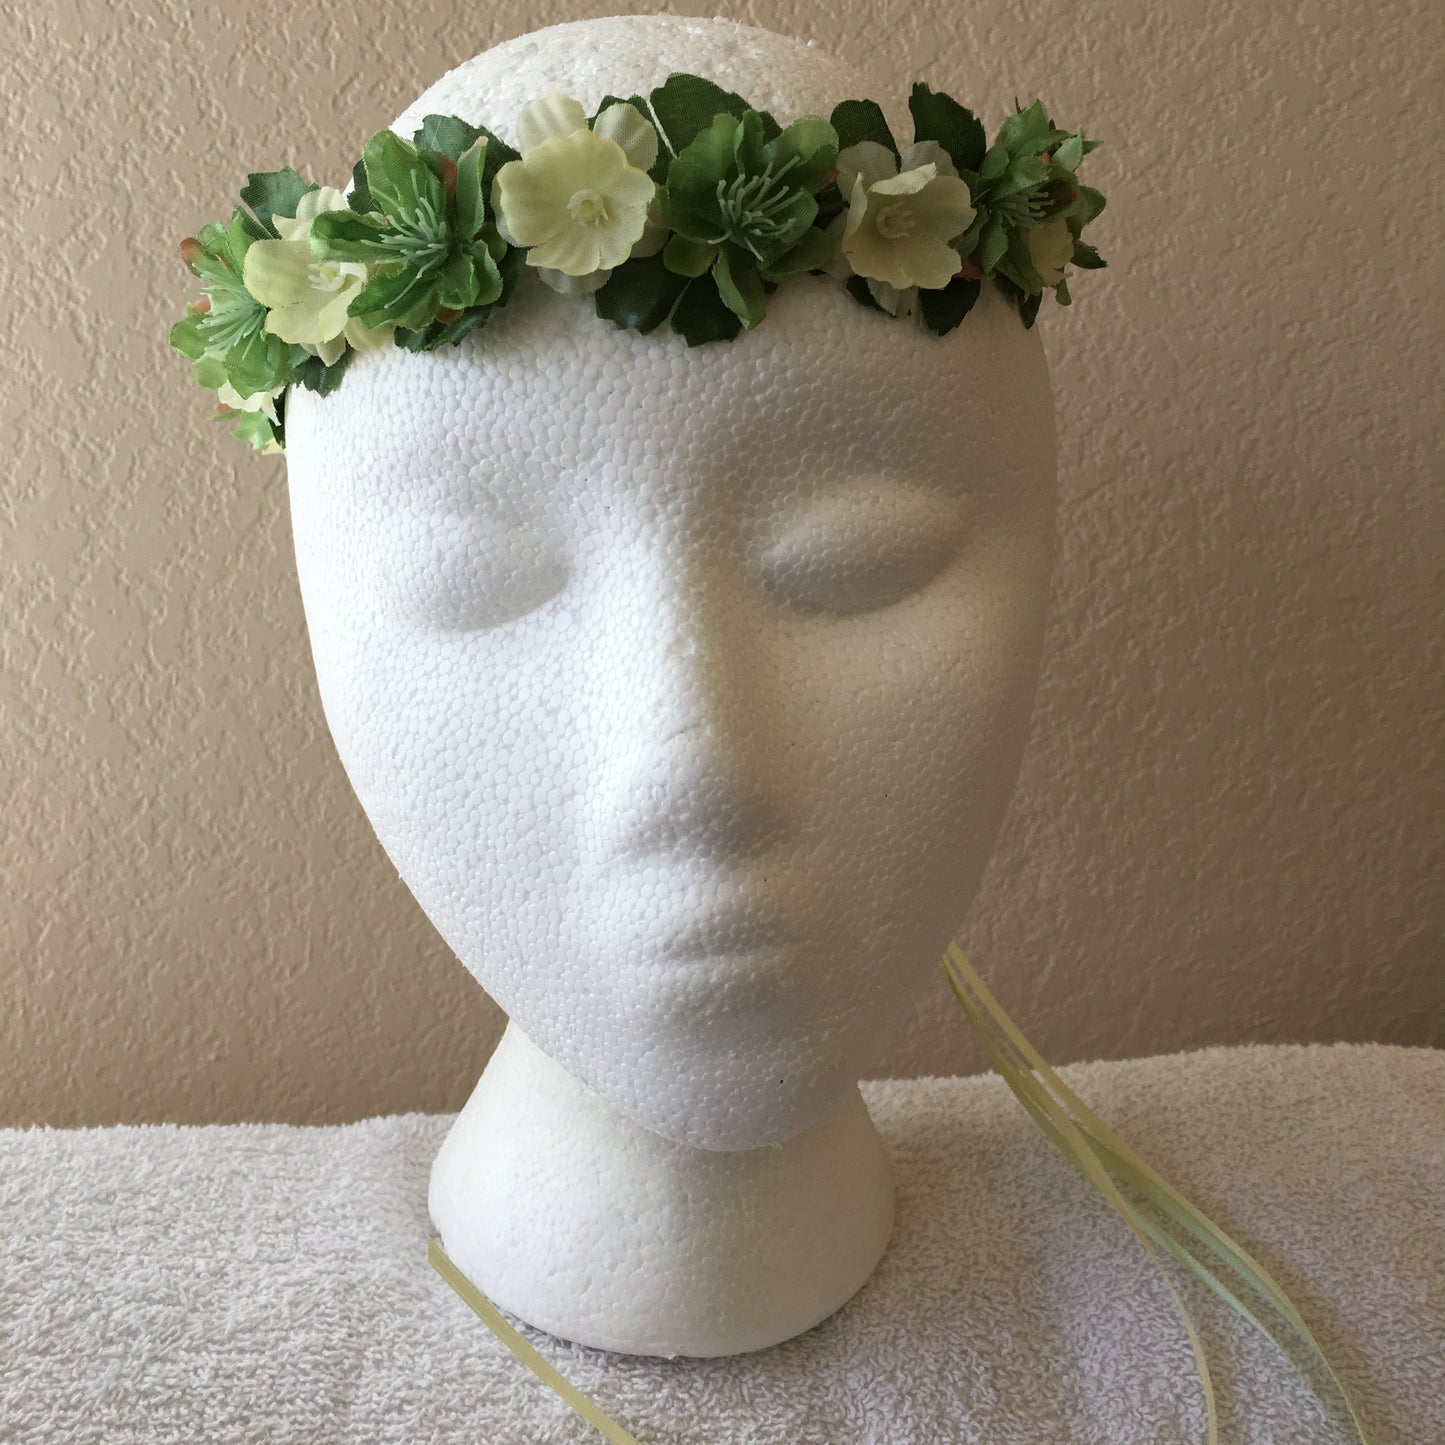 Extra Small Wreath - Pale yellow & green flowers